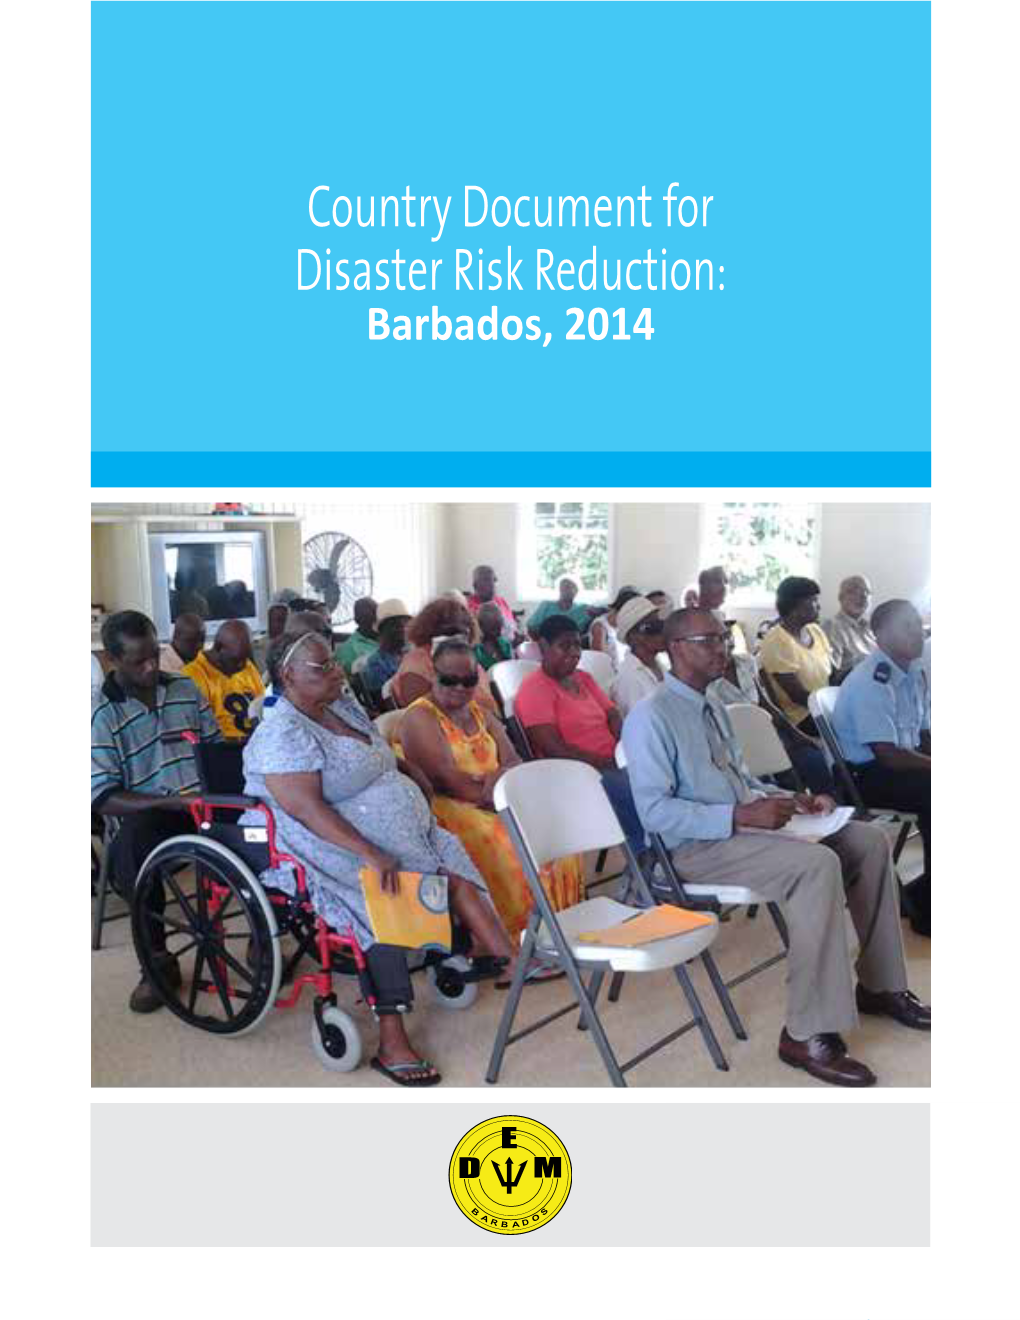 Country Document for Disaster Risk Reduction: Barbados, 2014